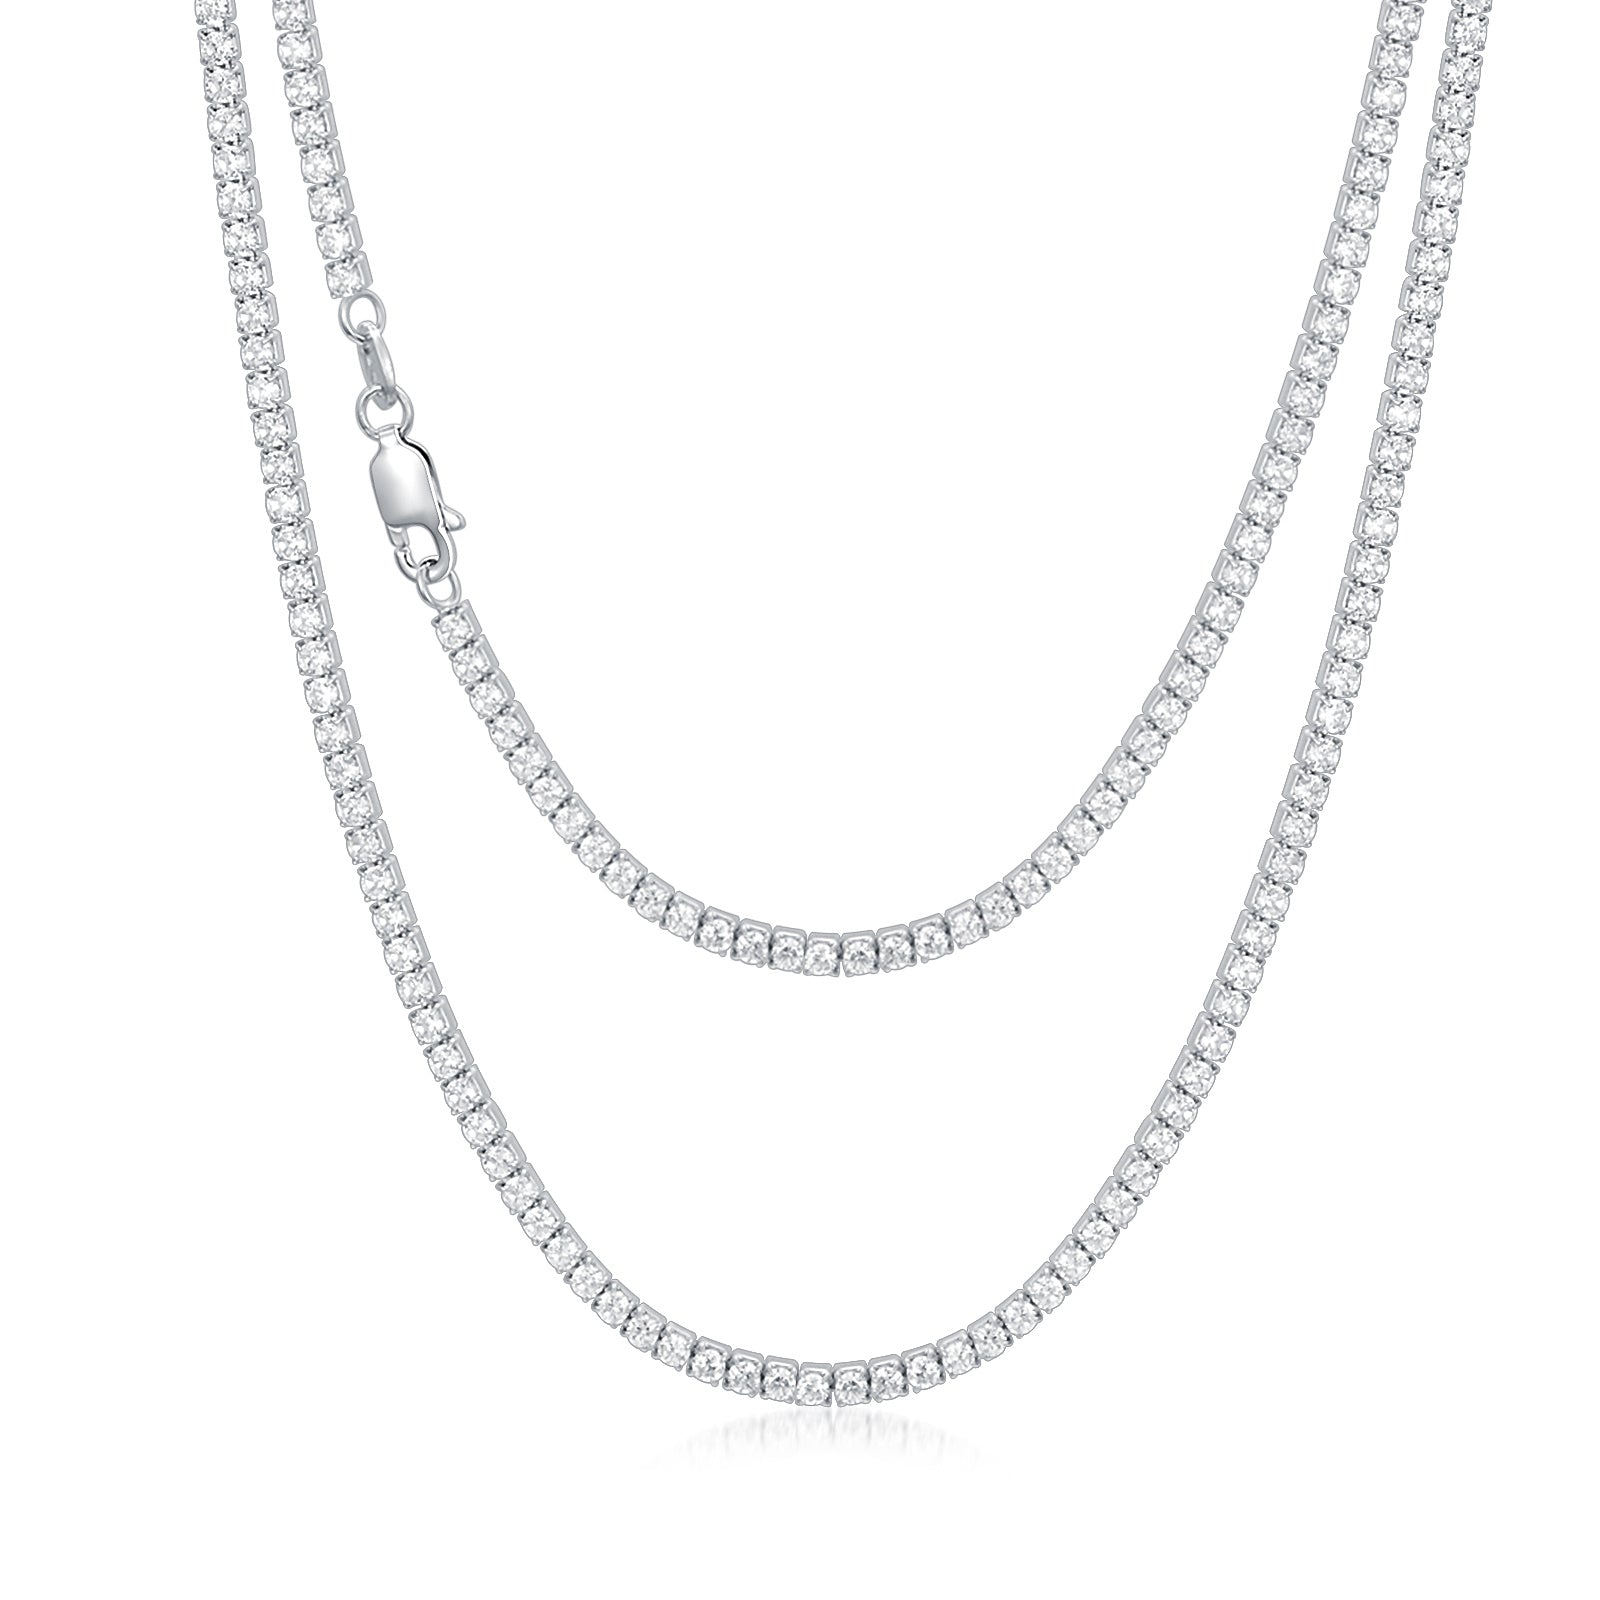 925 Sterling Silver Tennis Chain Authentic Cubic Zirconia Chain Necklace 18-26 Inch, 4MM